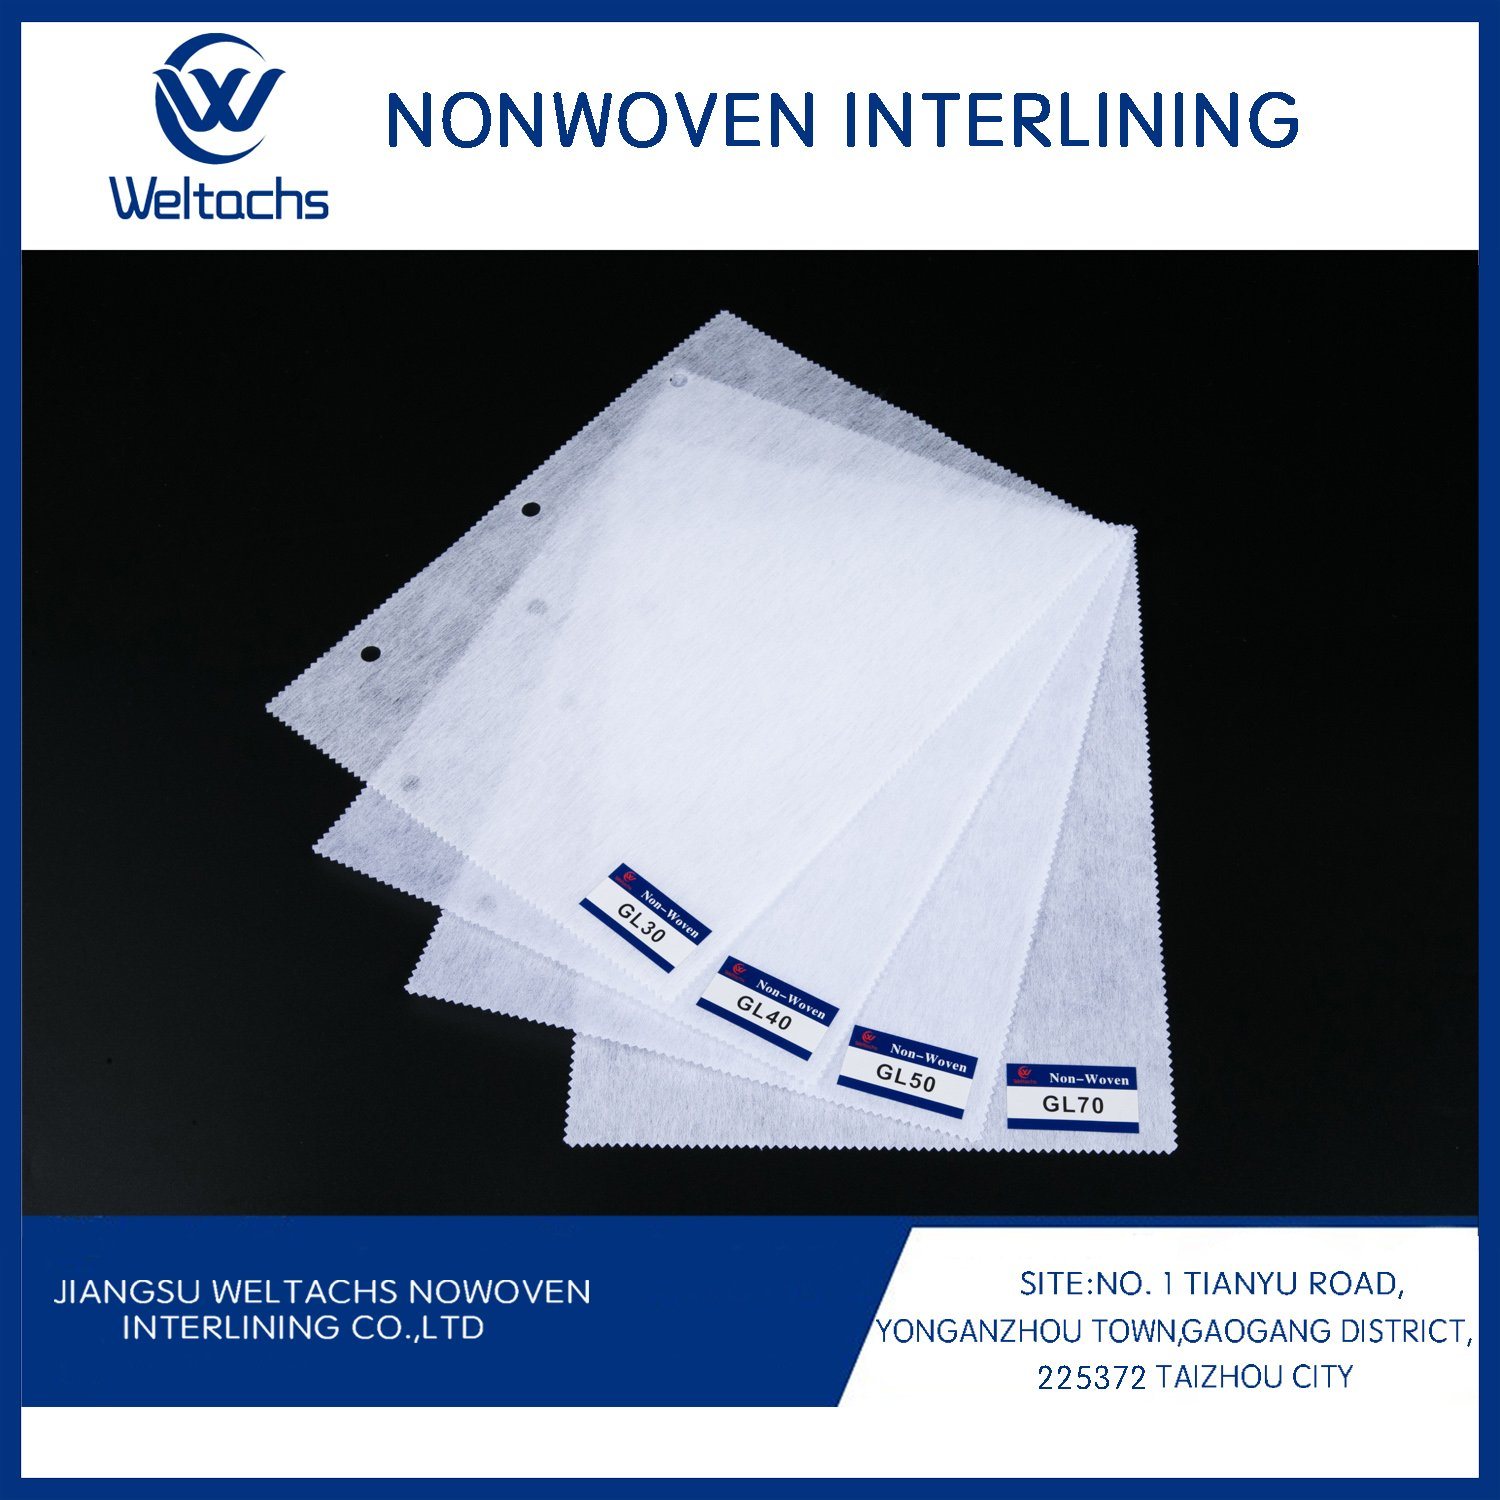 Hot Sale Dubai Magic Nonwoven Interlining PVA Hot Water Soluble Paper Dissolving in Water After Embroidery for Pakistan Market